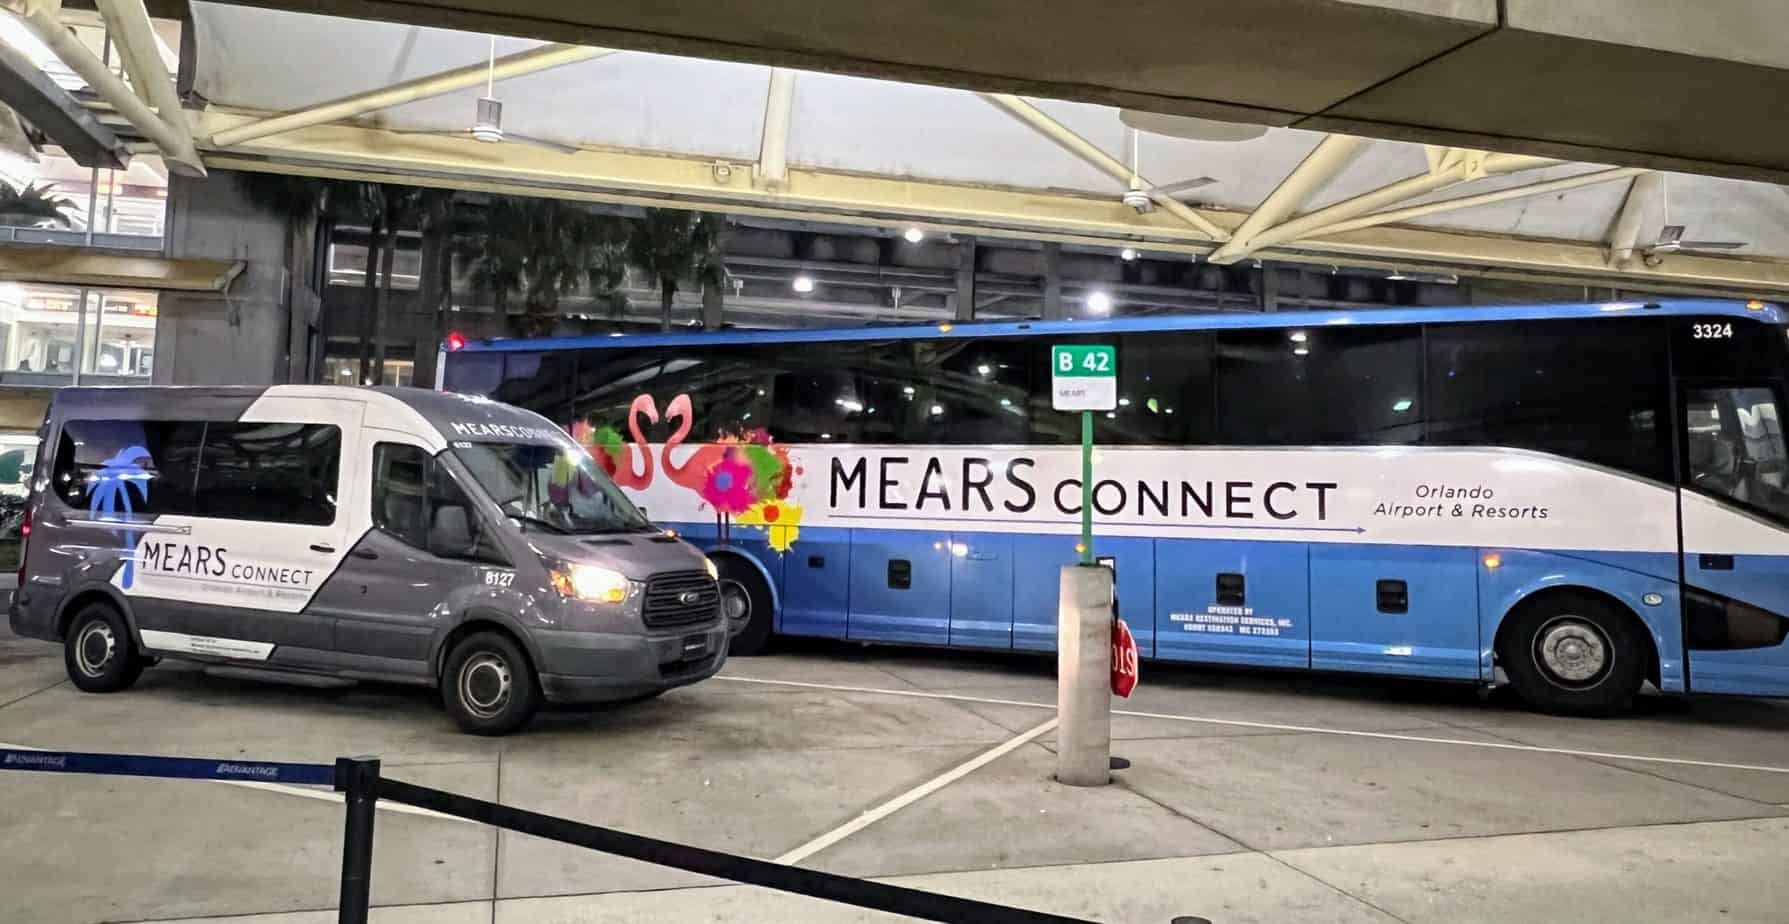 new magical express option: mears connect bus and shuttle van